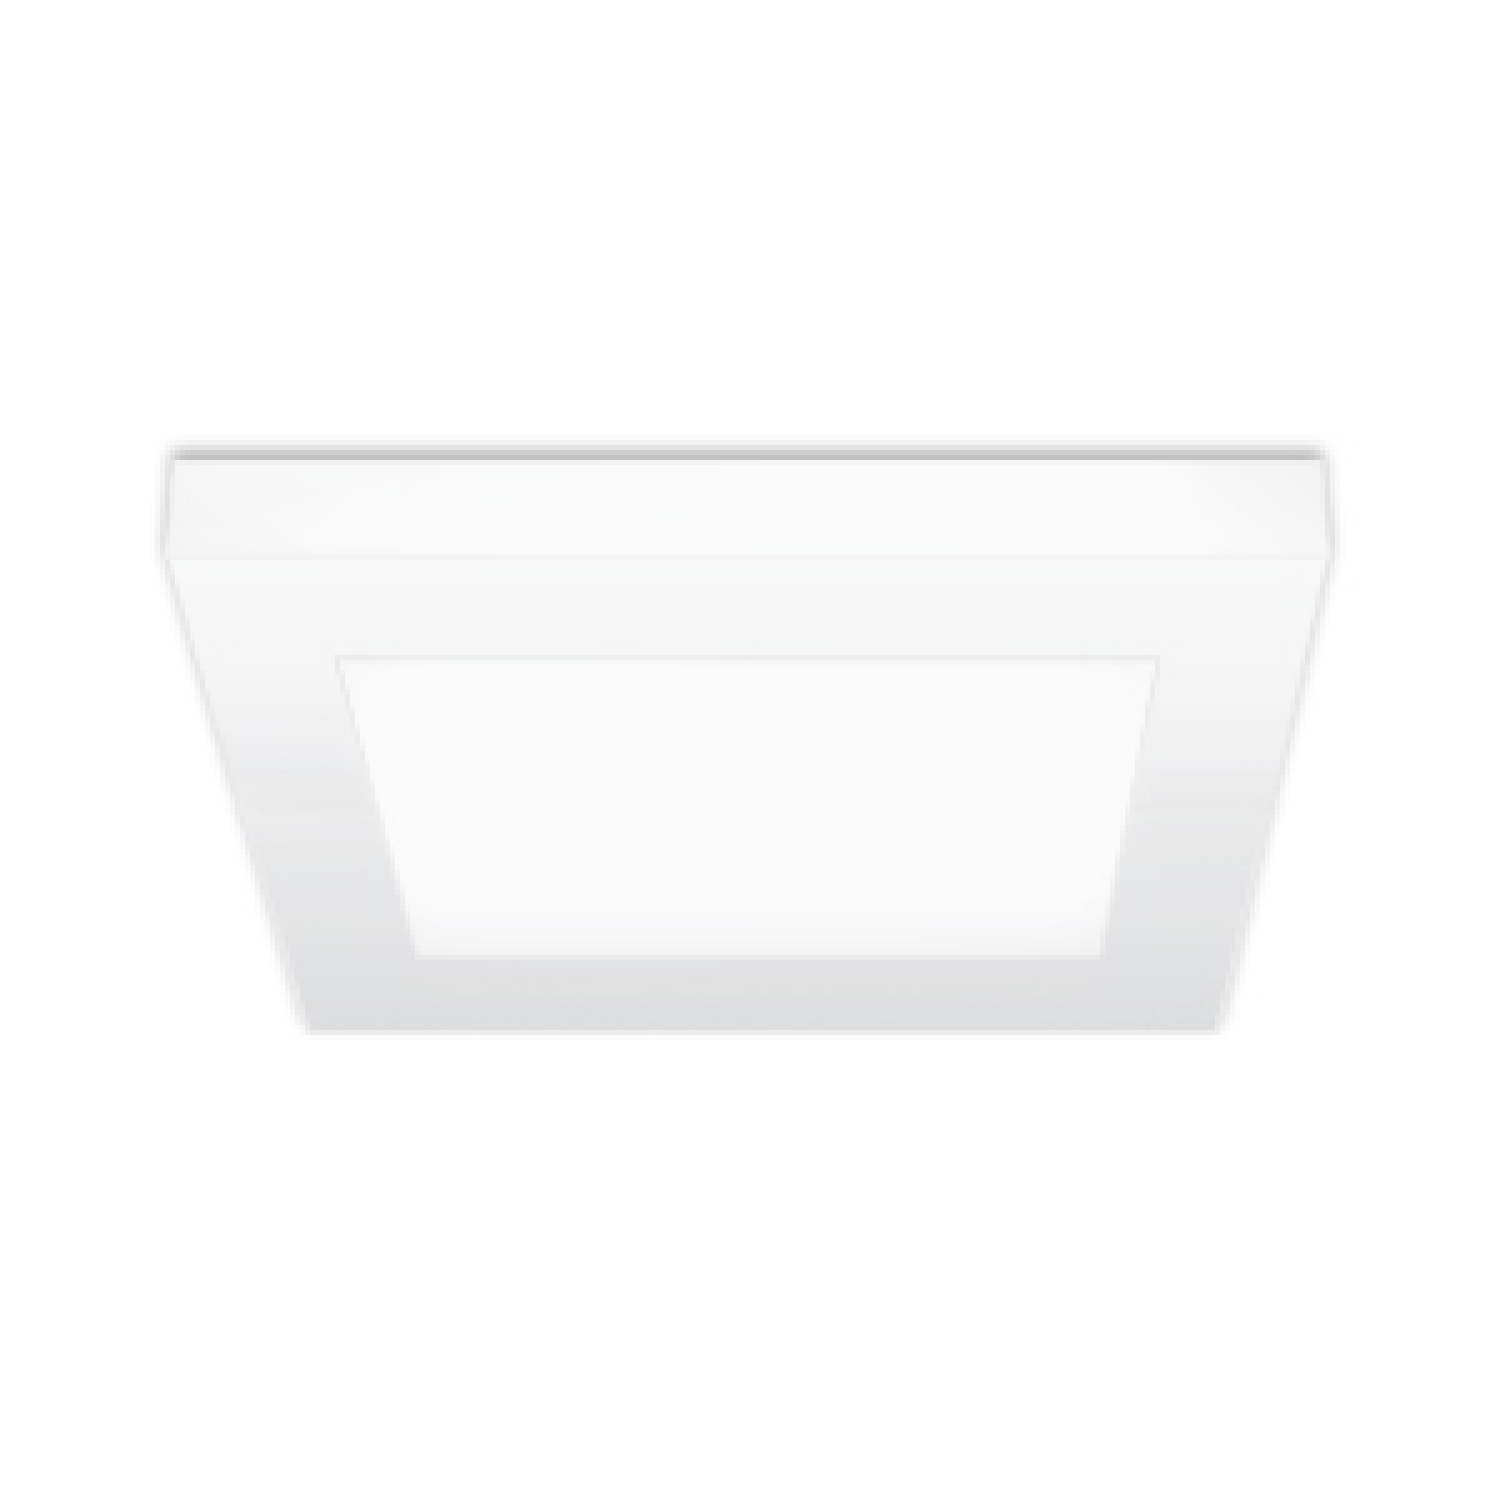 9 Inch Square Ceiling Light, Surface Mount, 1200 Lumens